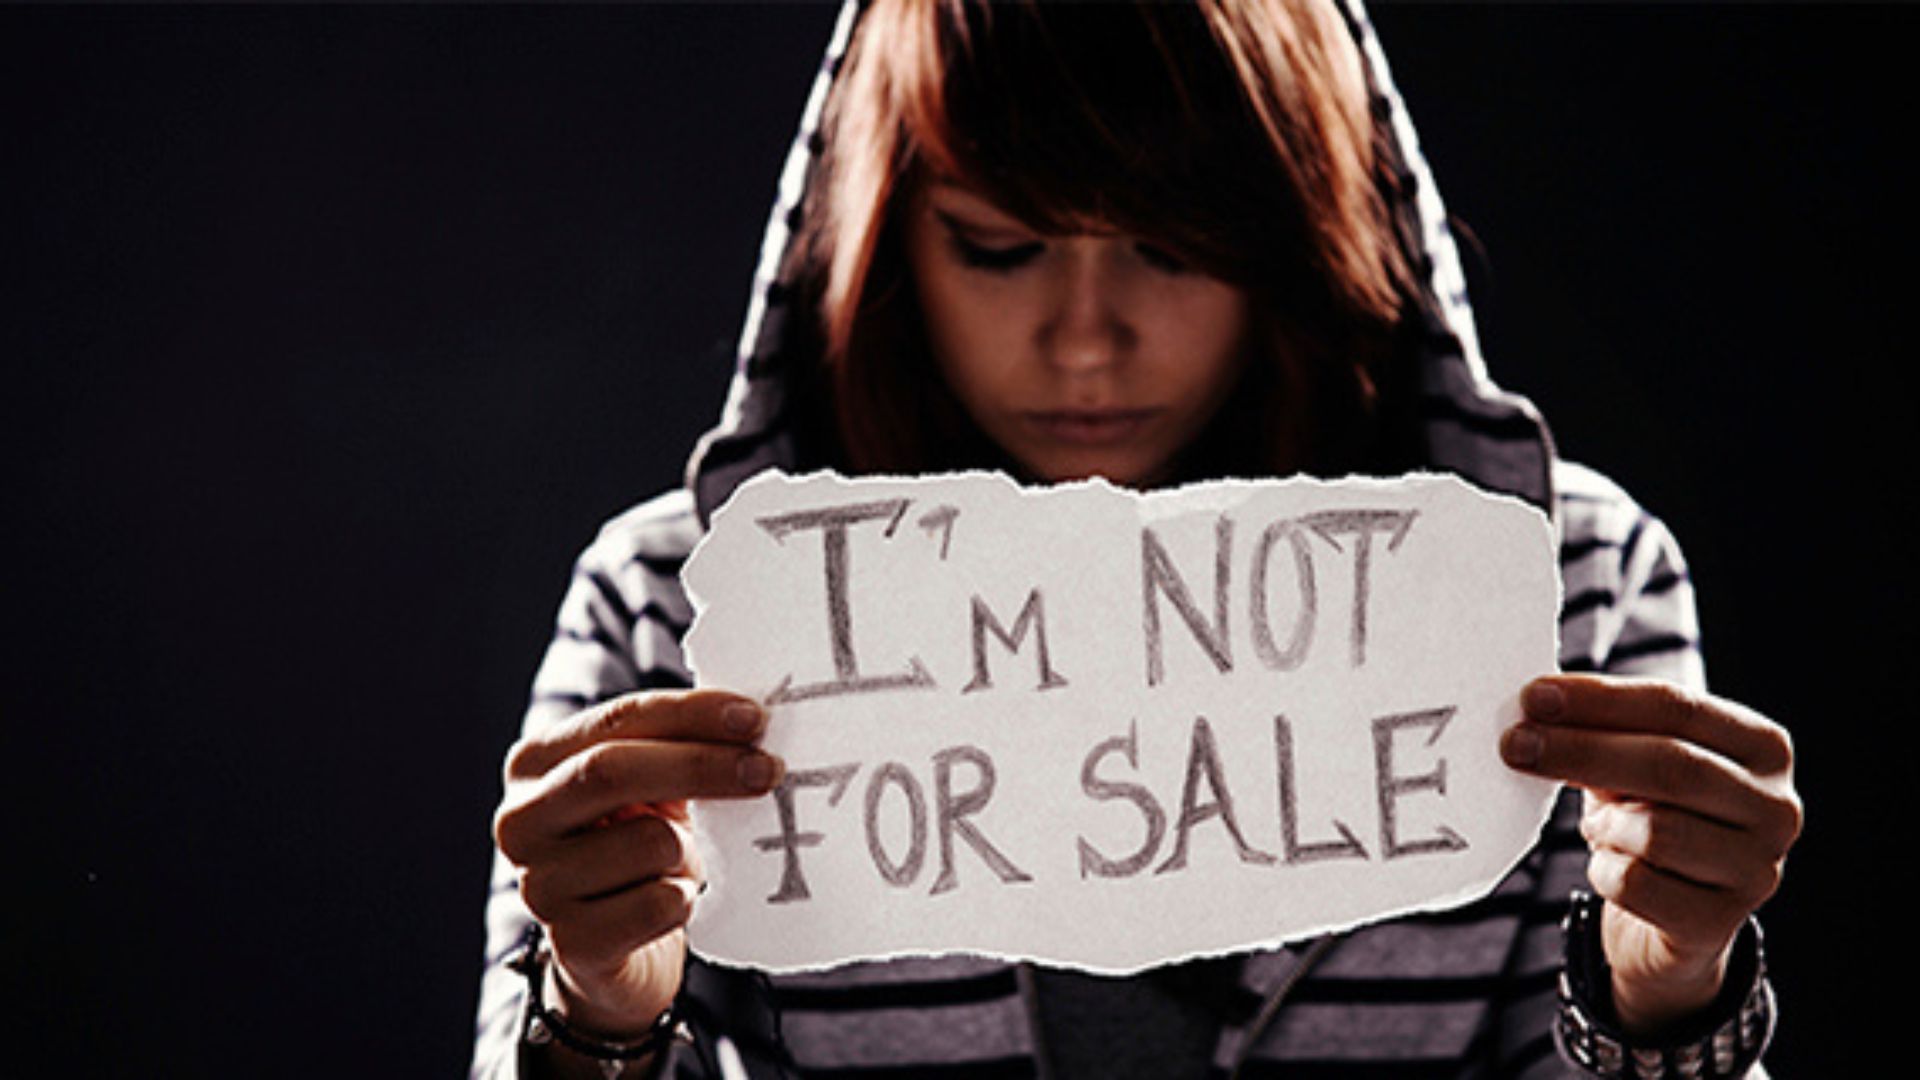 a young girl holding a paper written l'm not for sale showing the fight against forced labour